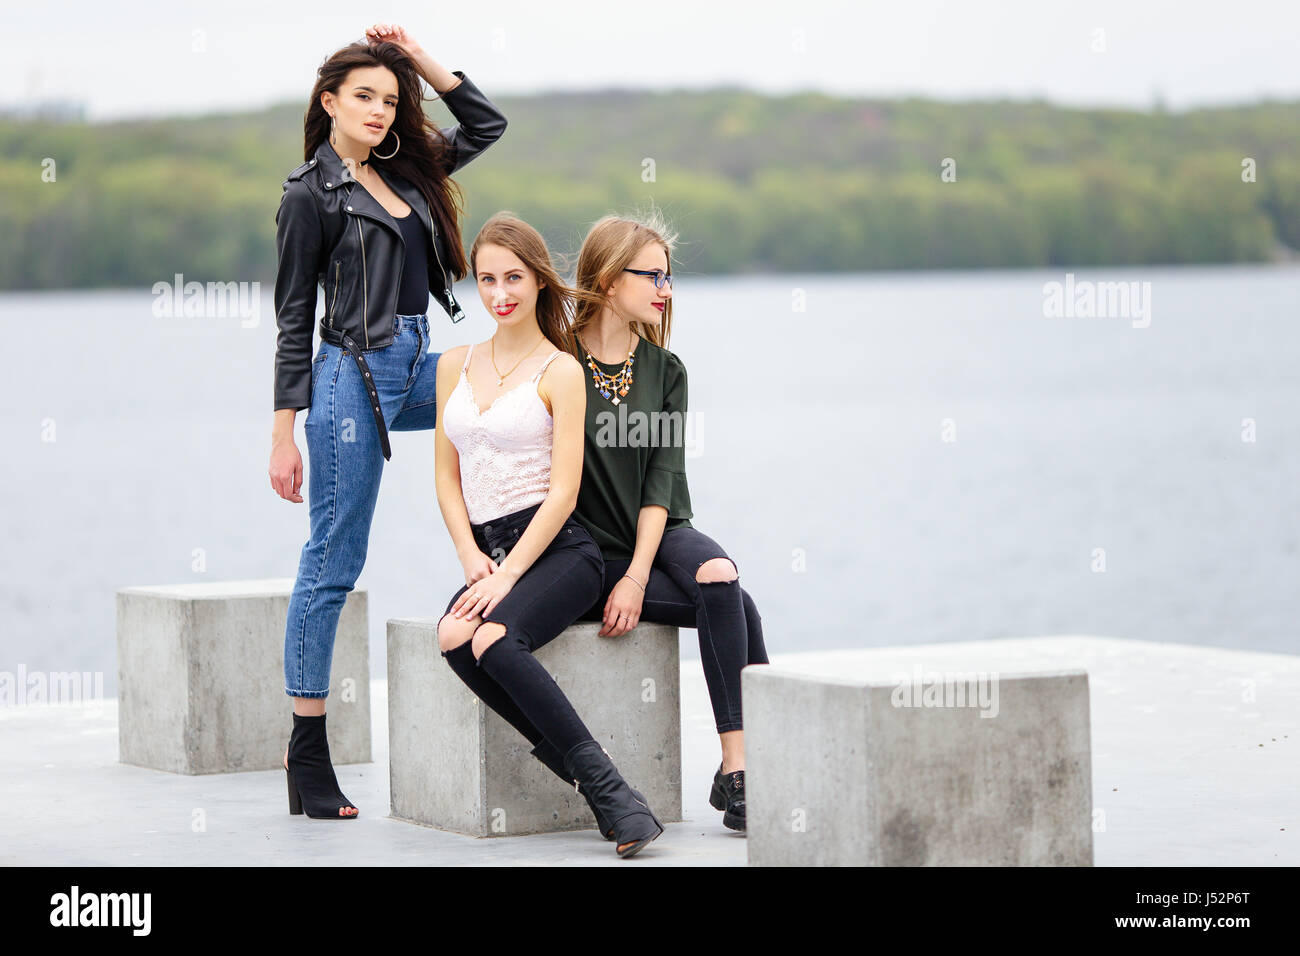 Two girls sit on bench with one stand near they, pose to camera Stock Photo